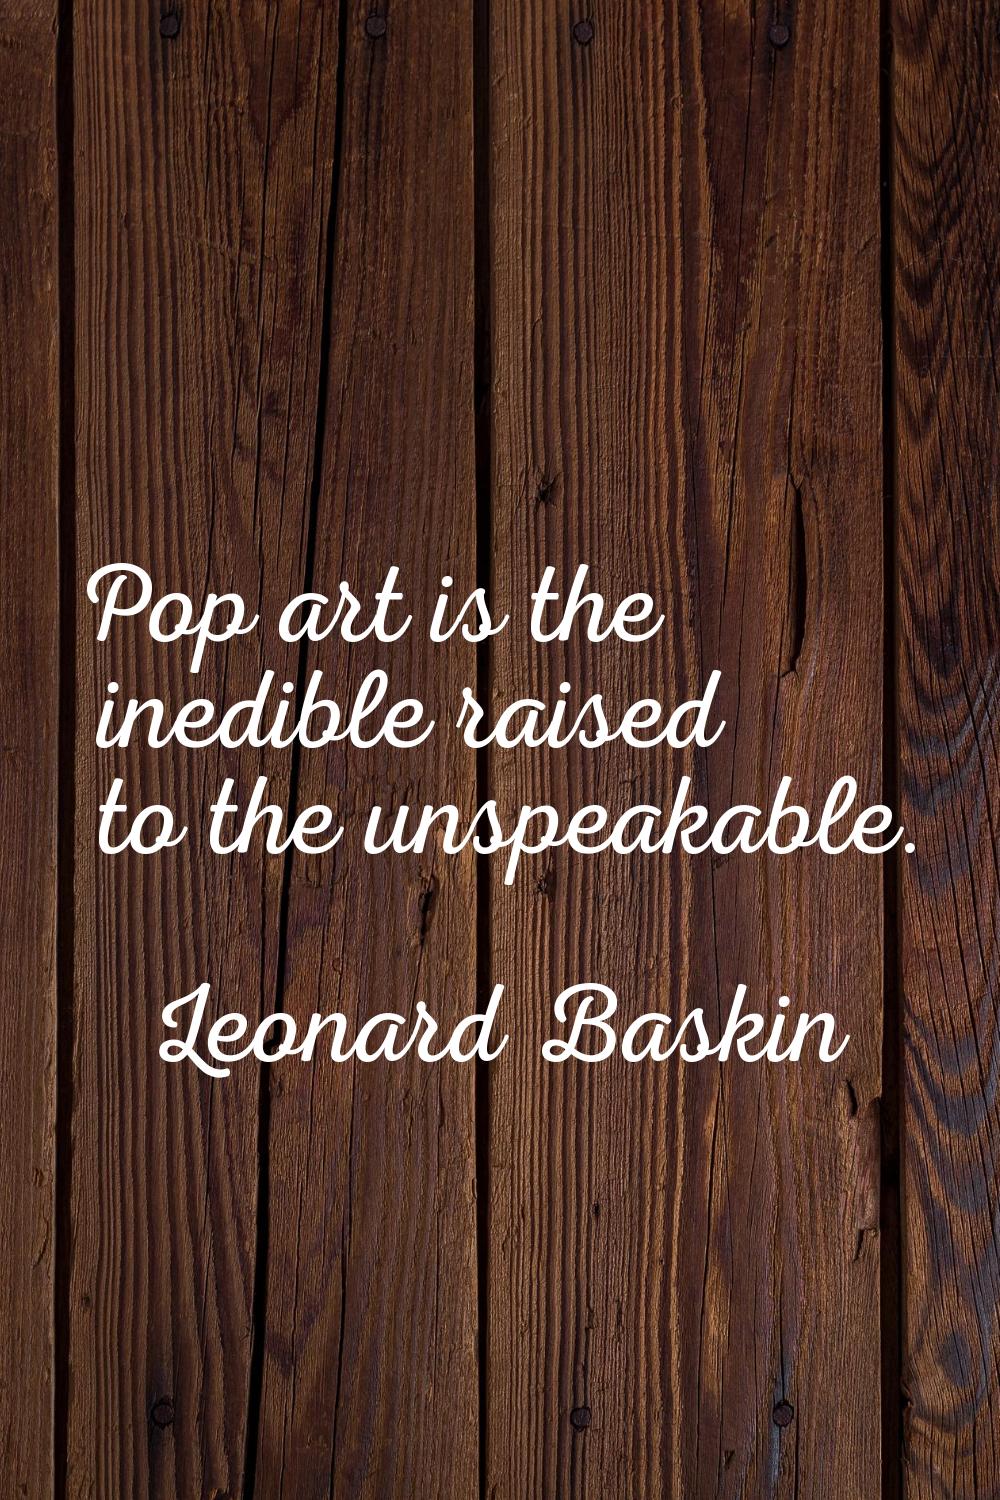 Pop art is the inedible raised to the unspeakable.